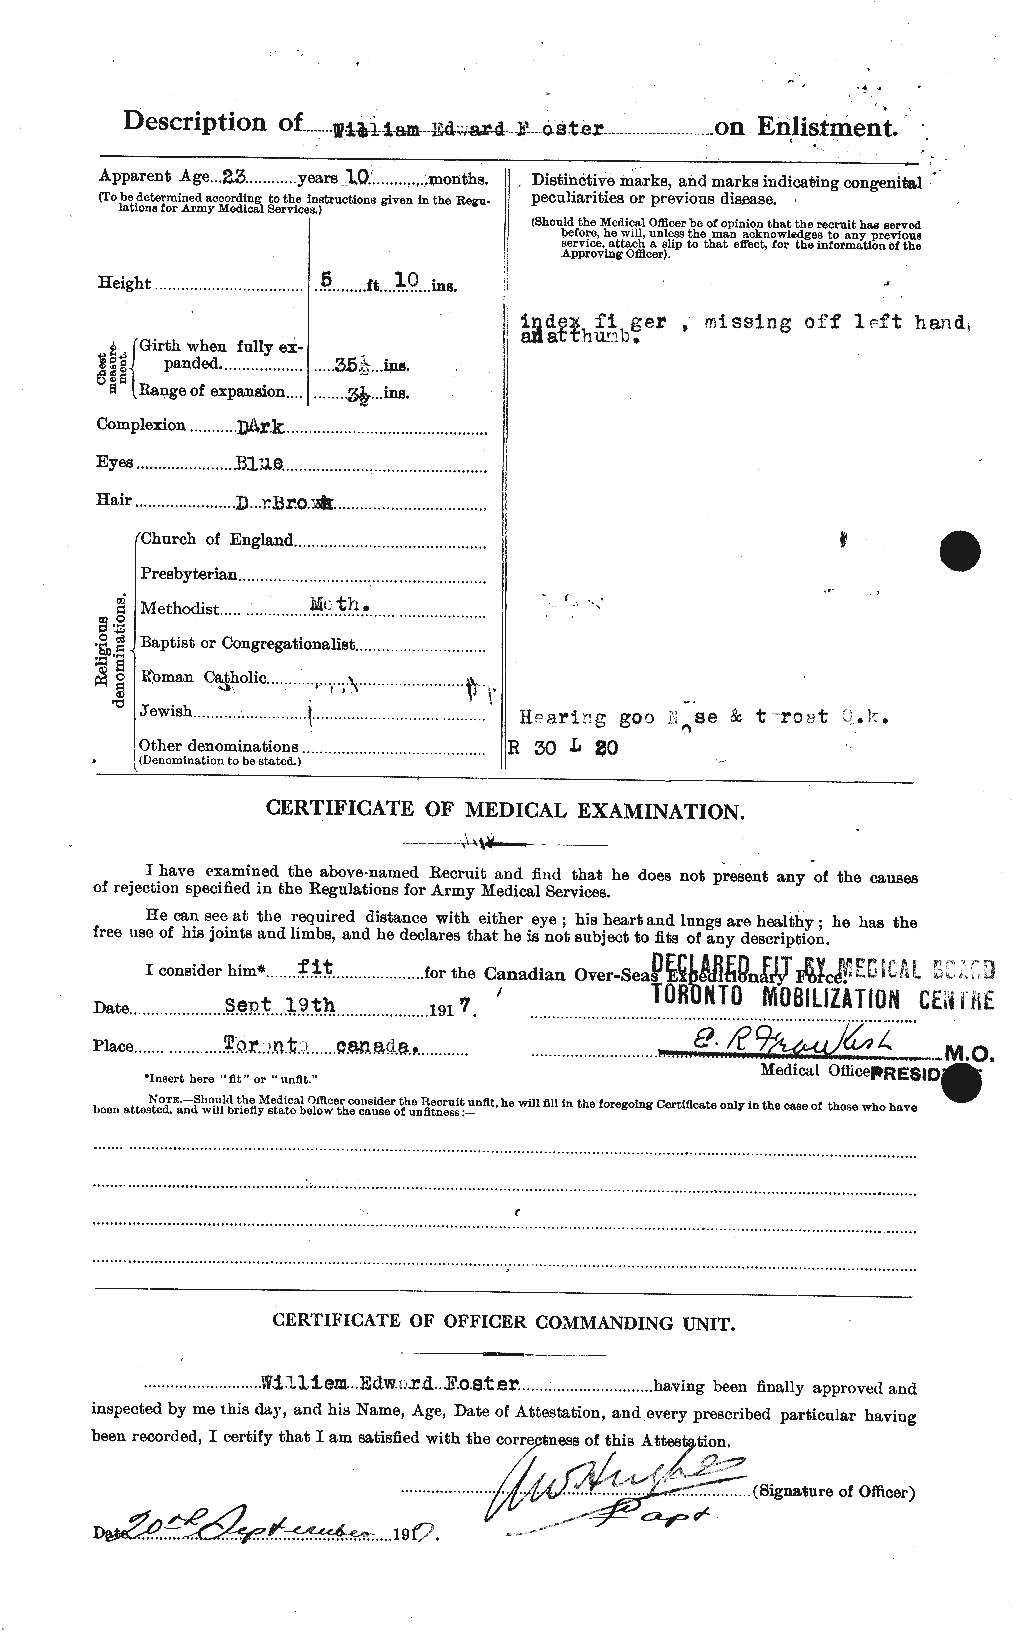 Personnel Records of the First World War - CEF 328738b